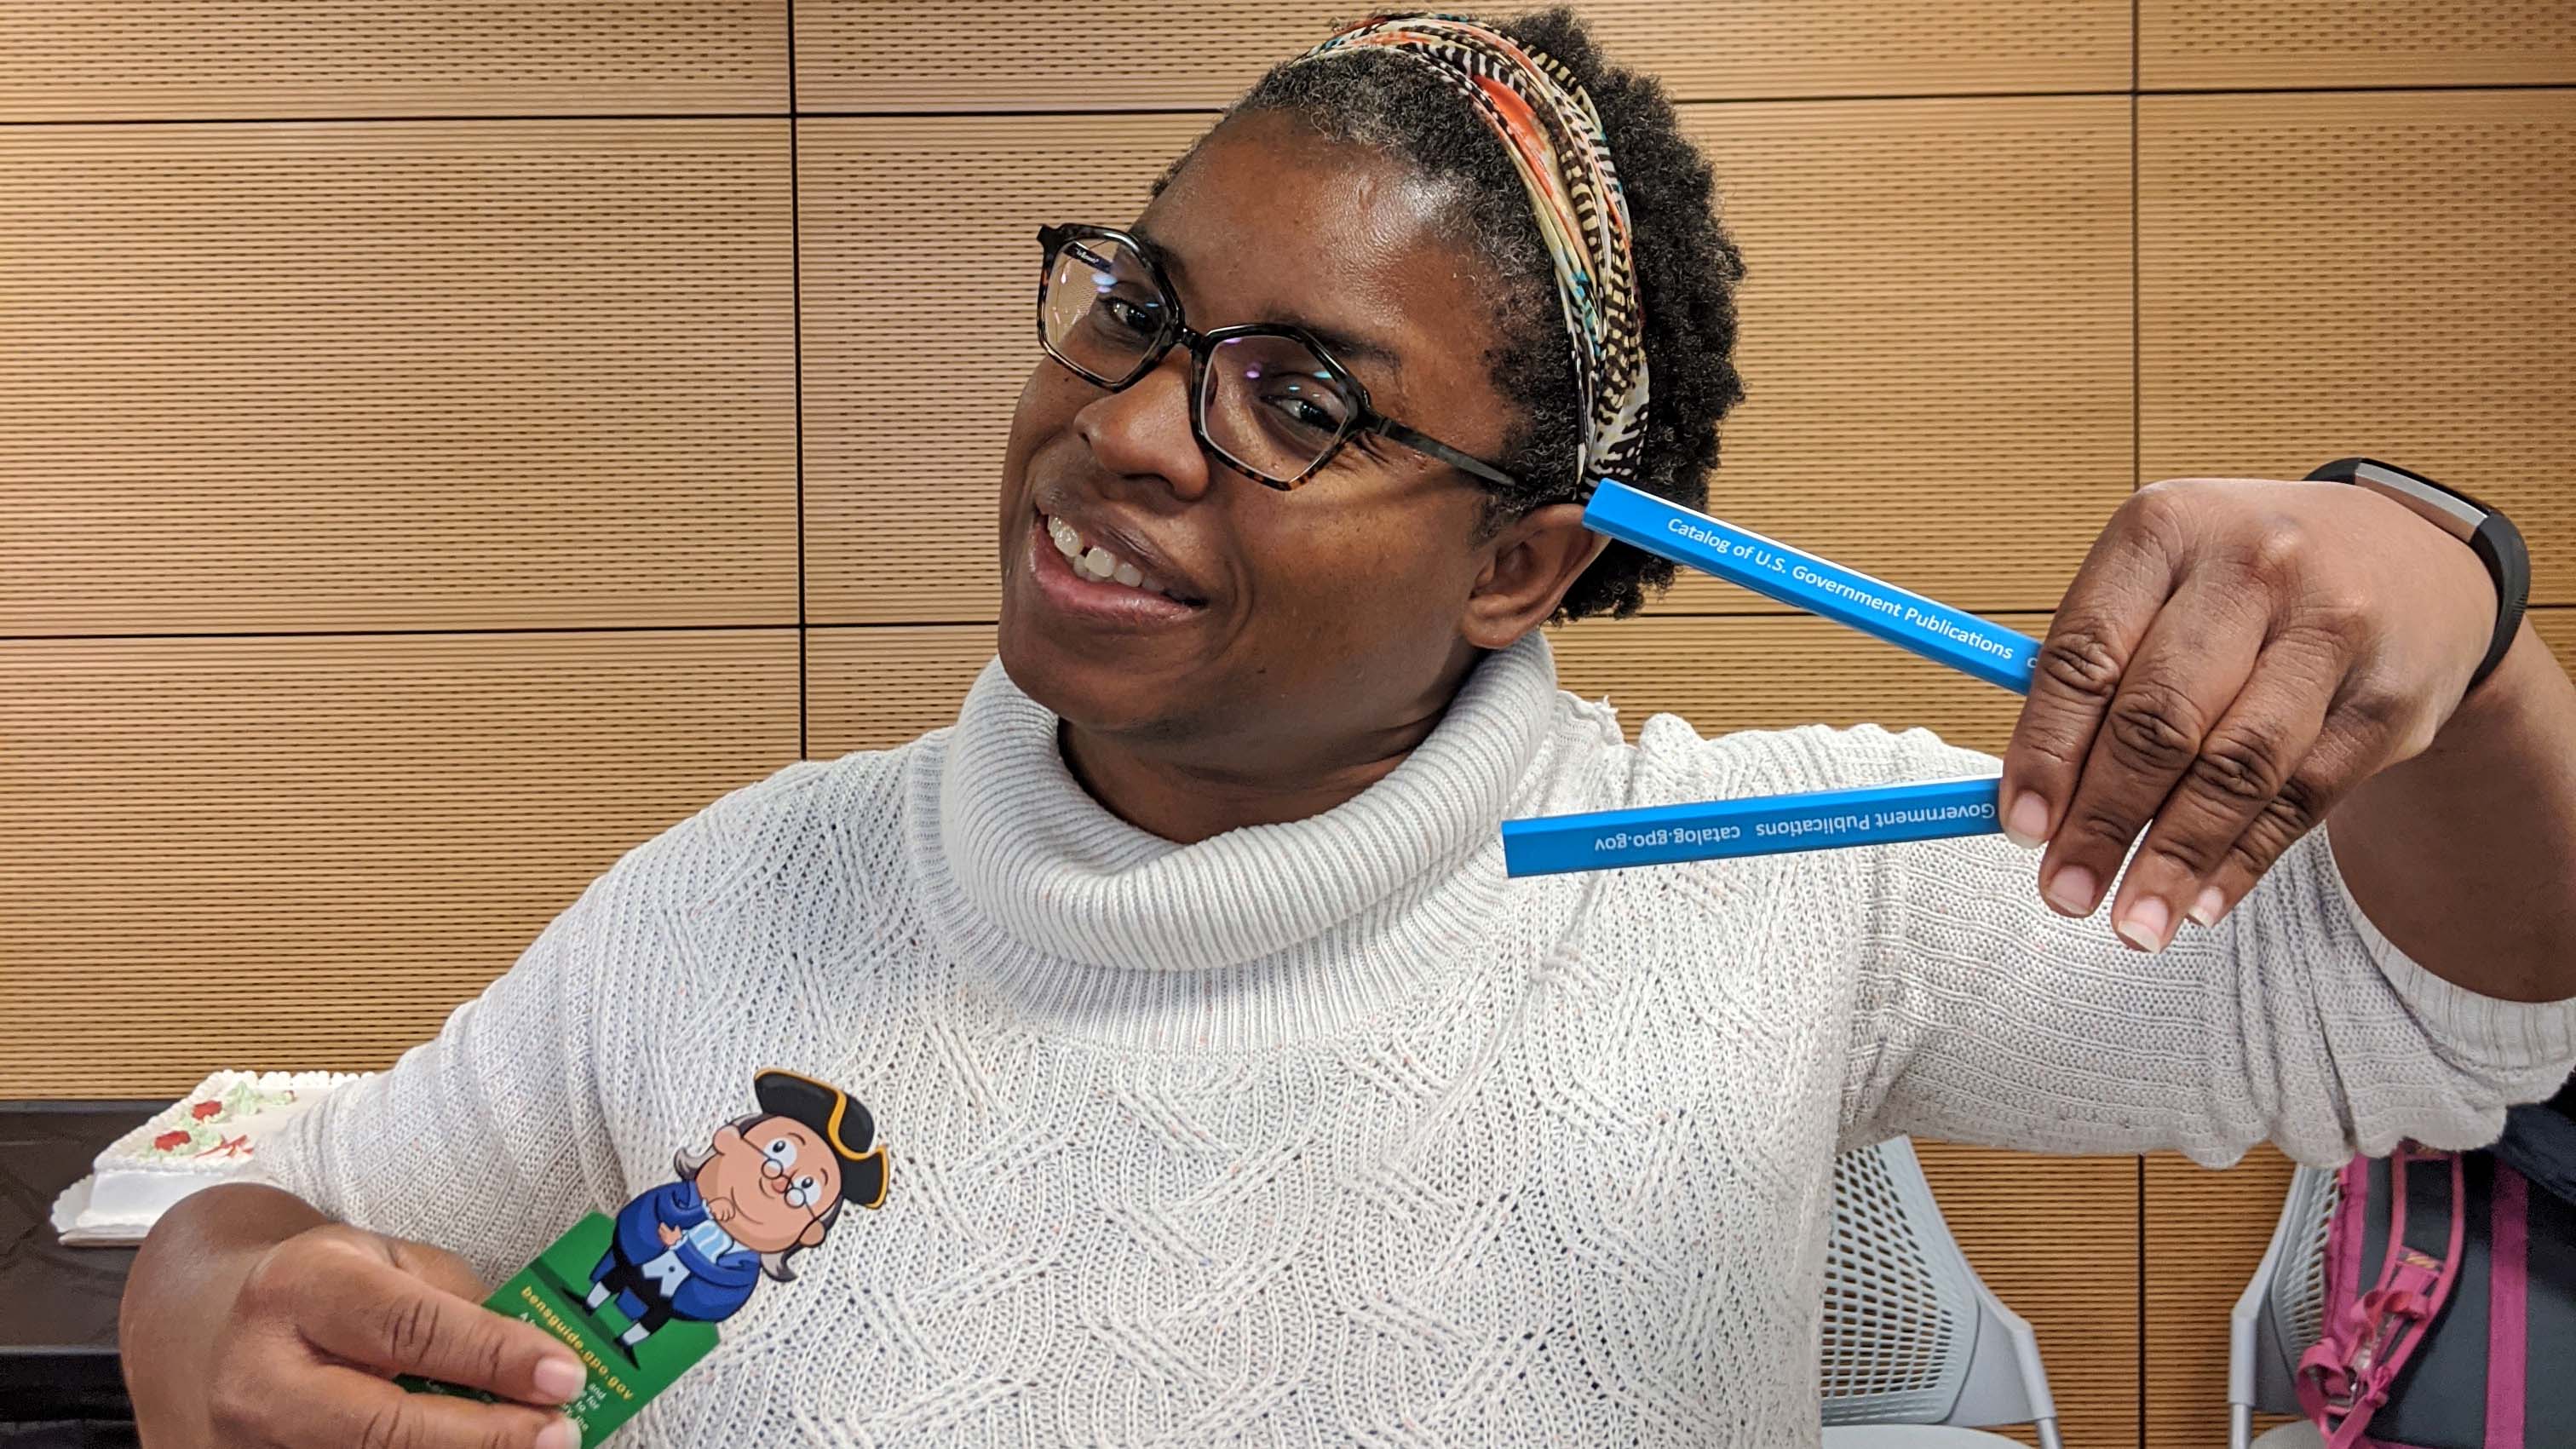 Smiling Black woman wearng white turtleneck sweater, glasses, and colorful hairband, holding pencils in one hand and a bookmark in the other.